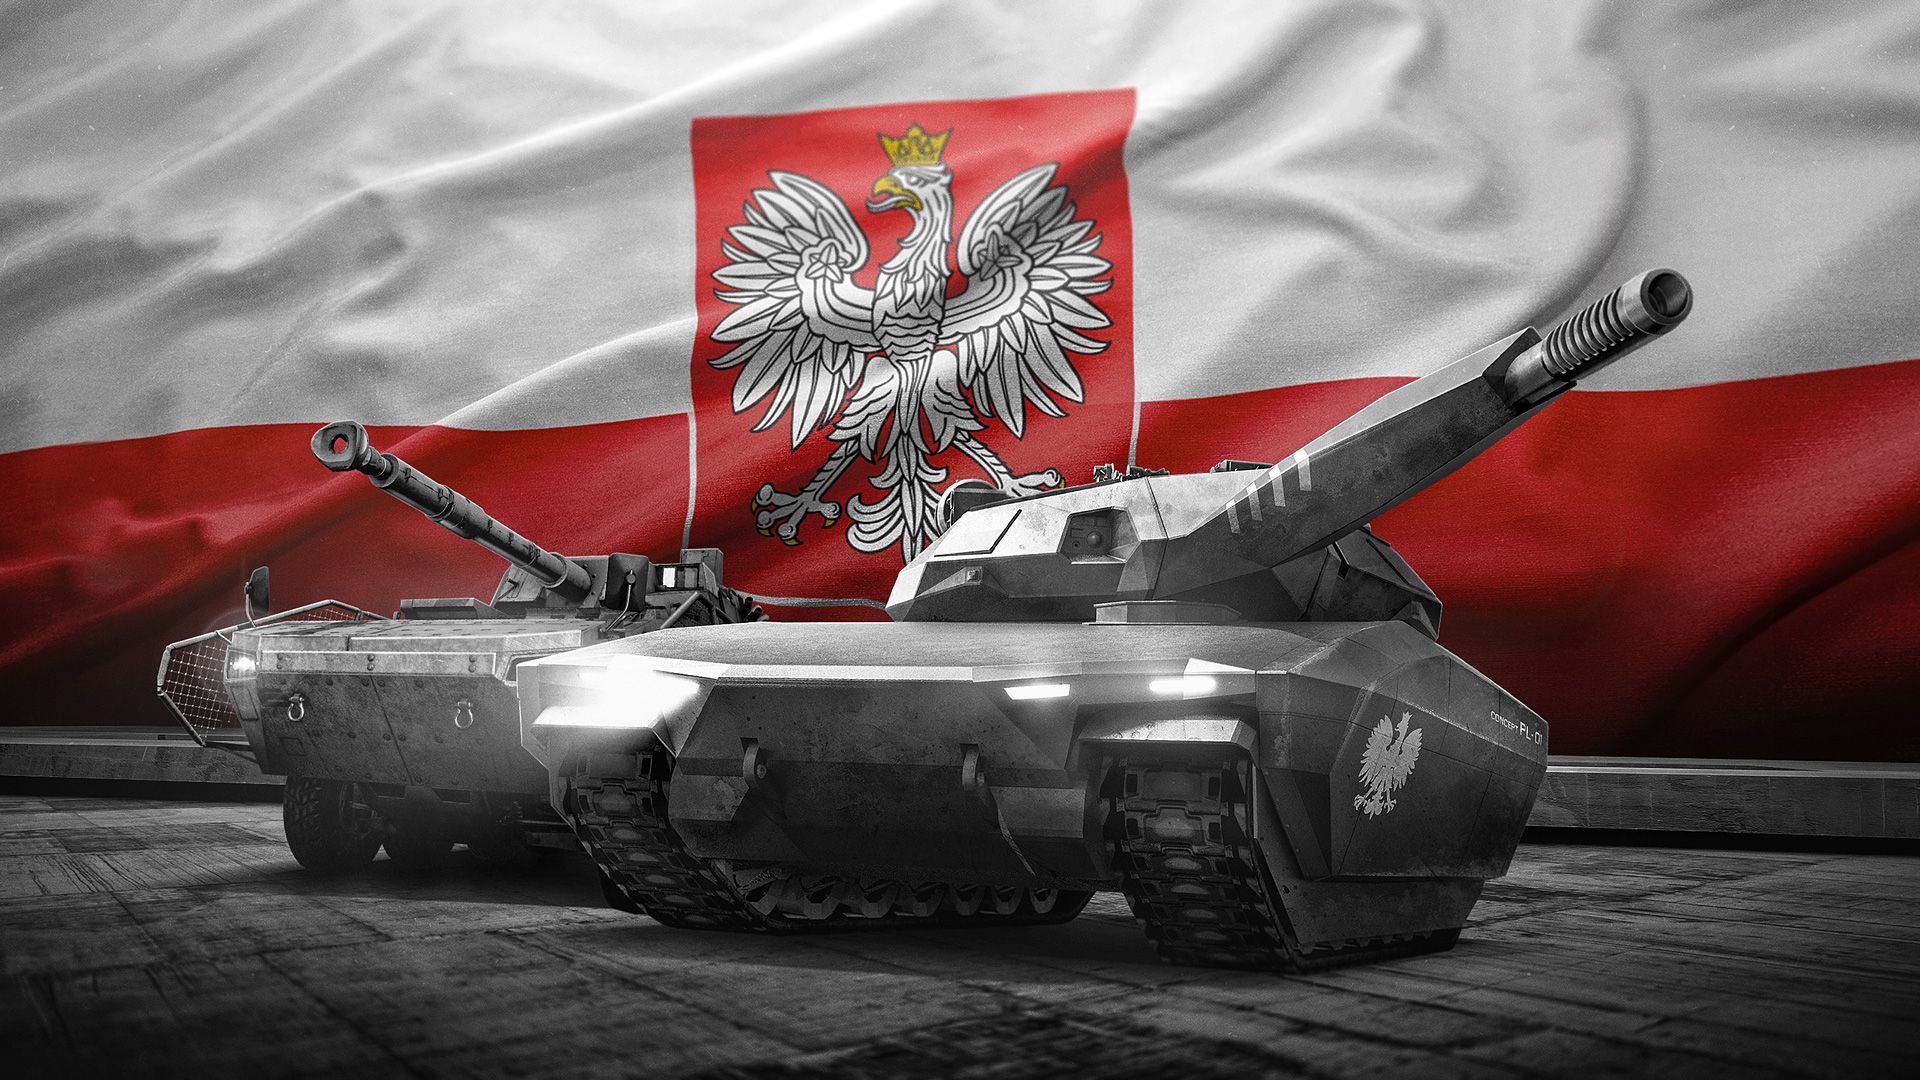 Celebrating the 100th anniversary of Polish Independence. Armored